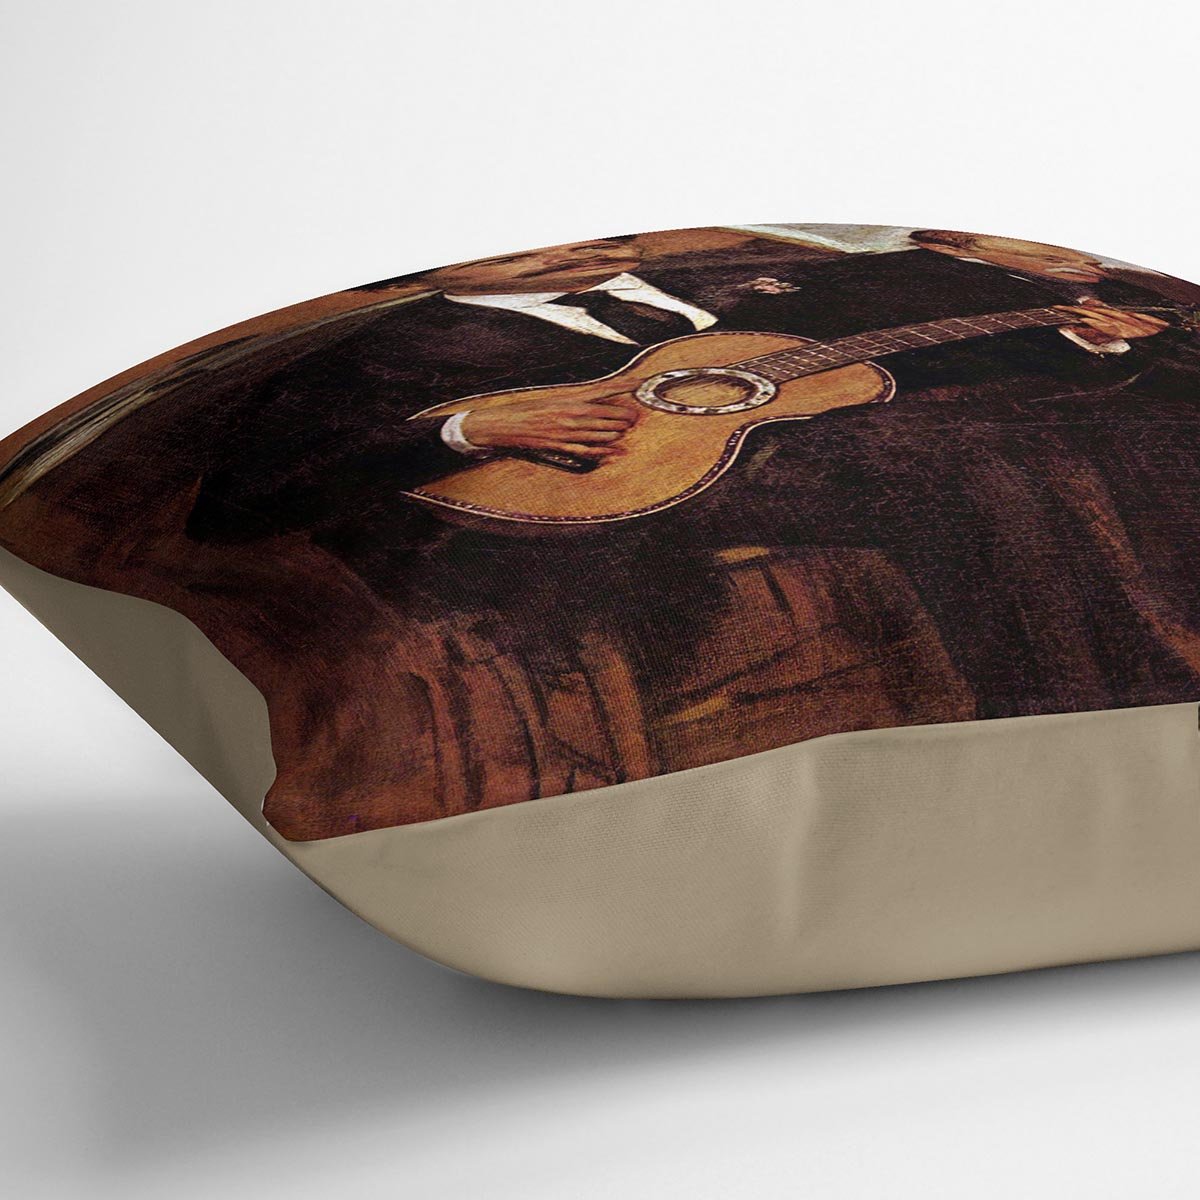 The guitarist Pagans and Monsieur Degas by Manet Throw Pillow